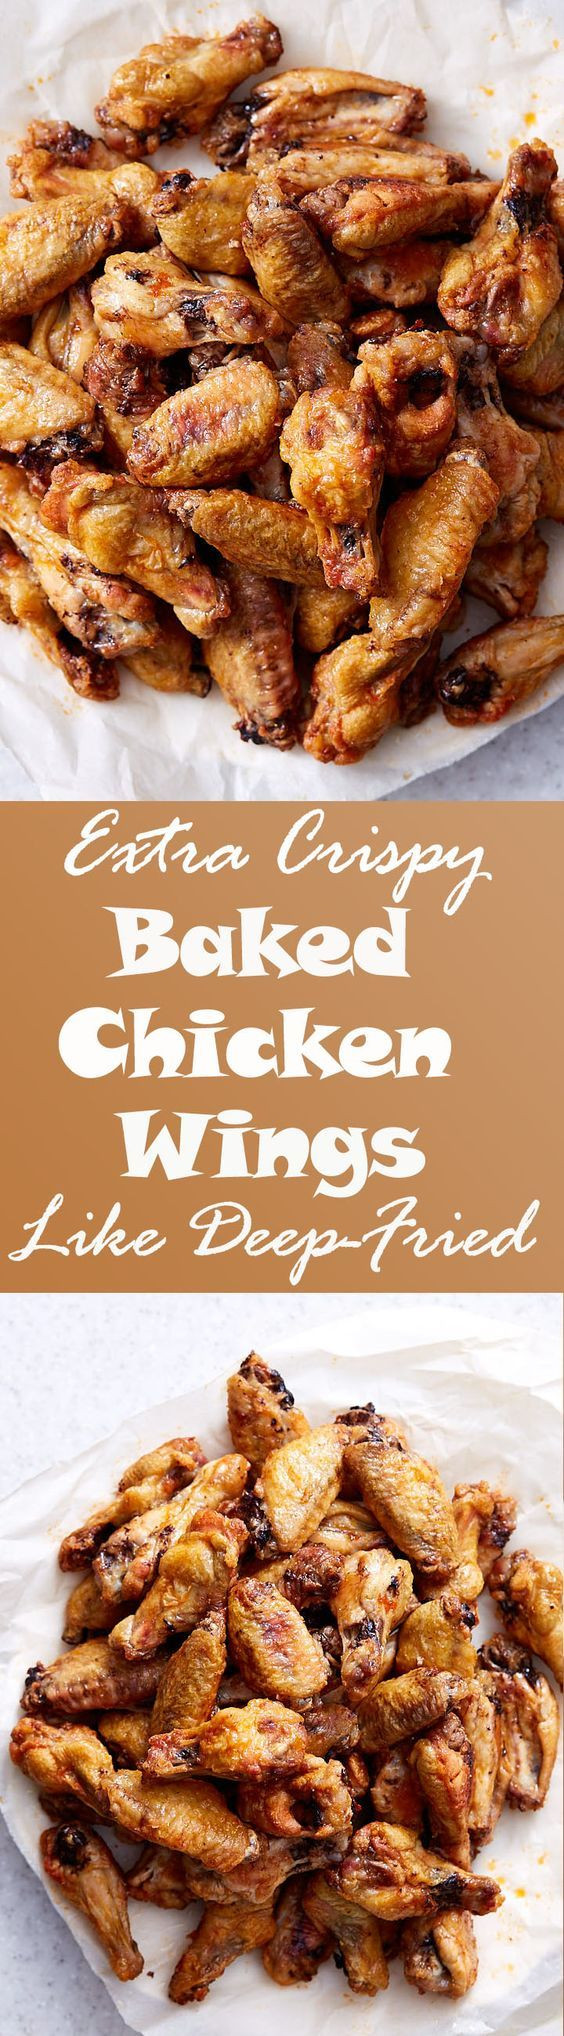 Deep Fried Chicken Wings Calories
 These baked chicken wings are extra crispy on the outside